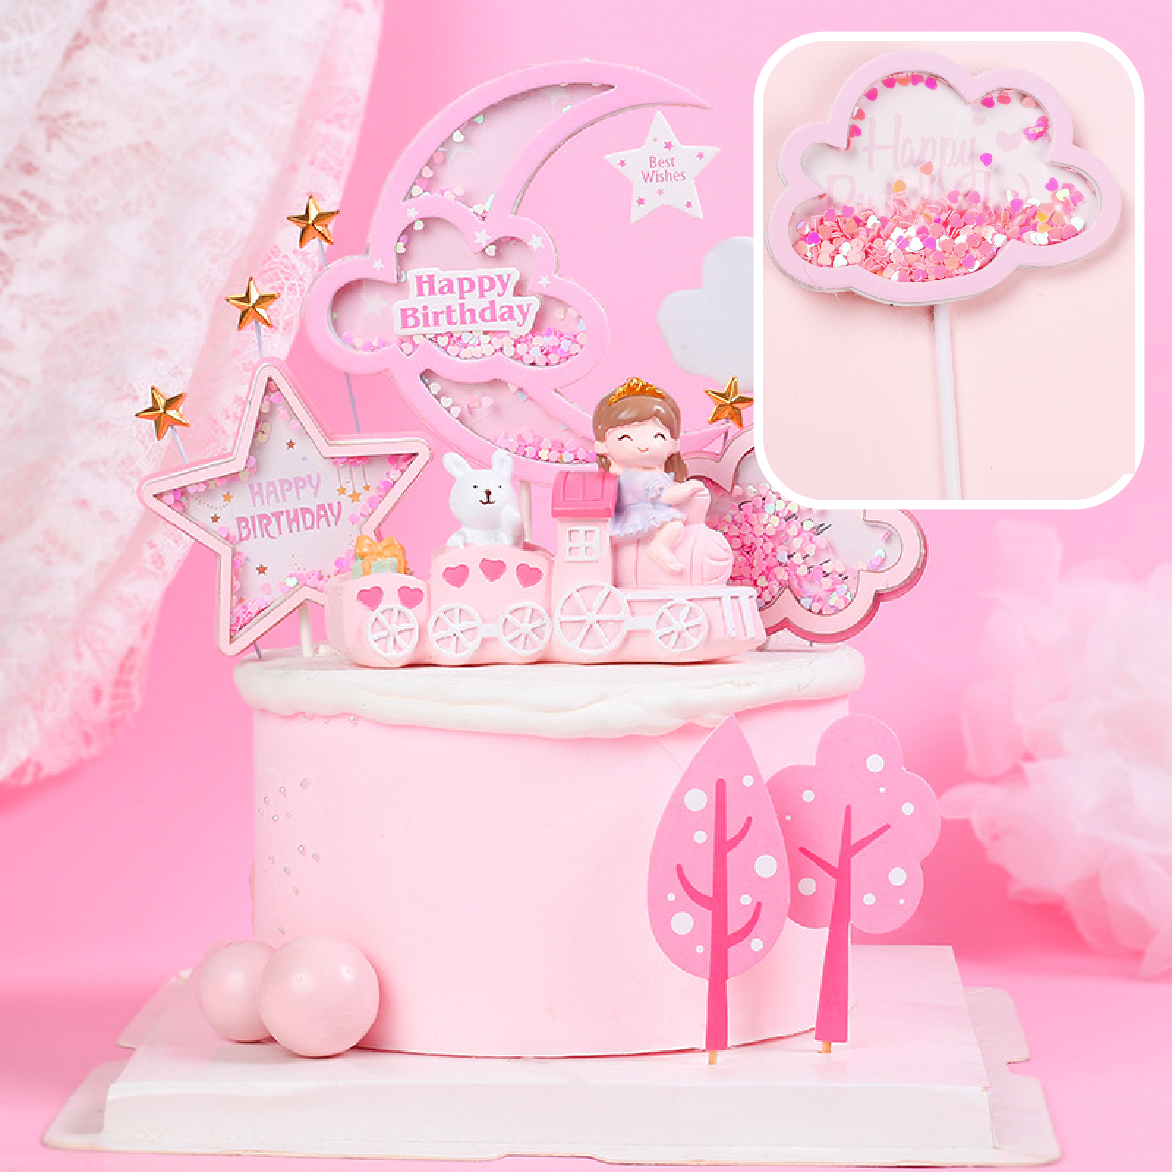 Cake Decoration, Cupcake Topper - 'Sequin Cloud' - Pink - Rampant Coffee Company